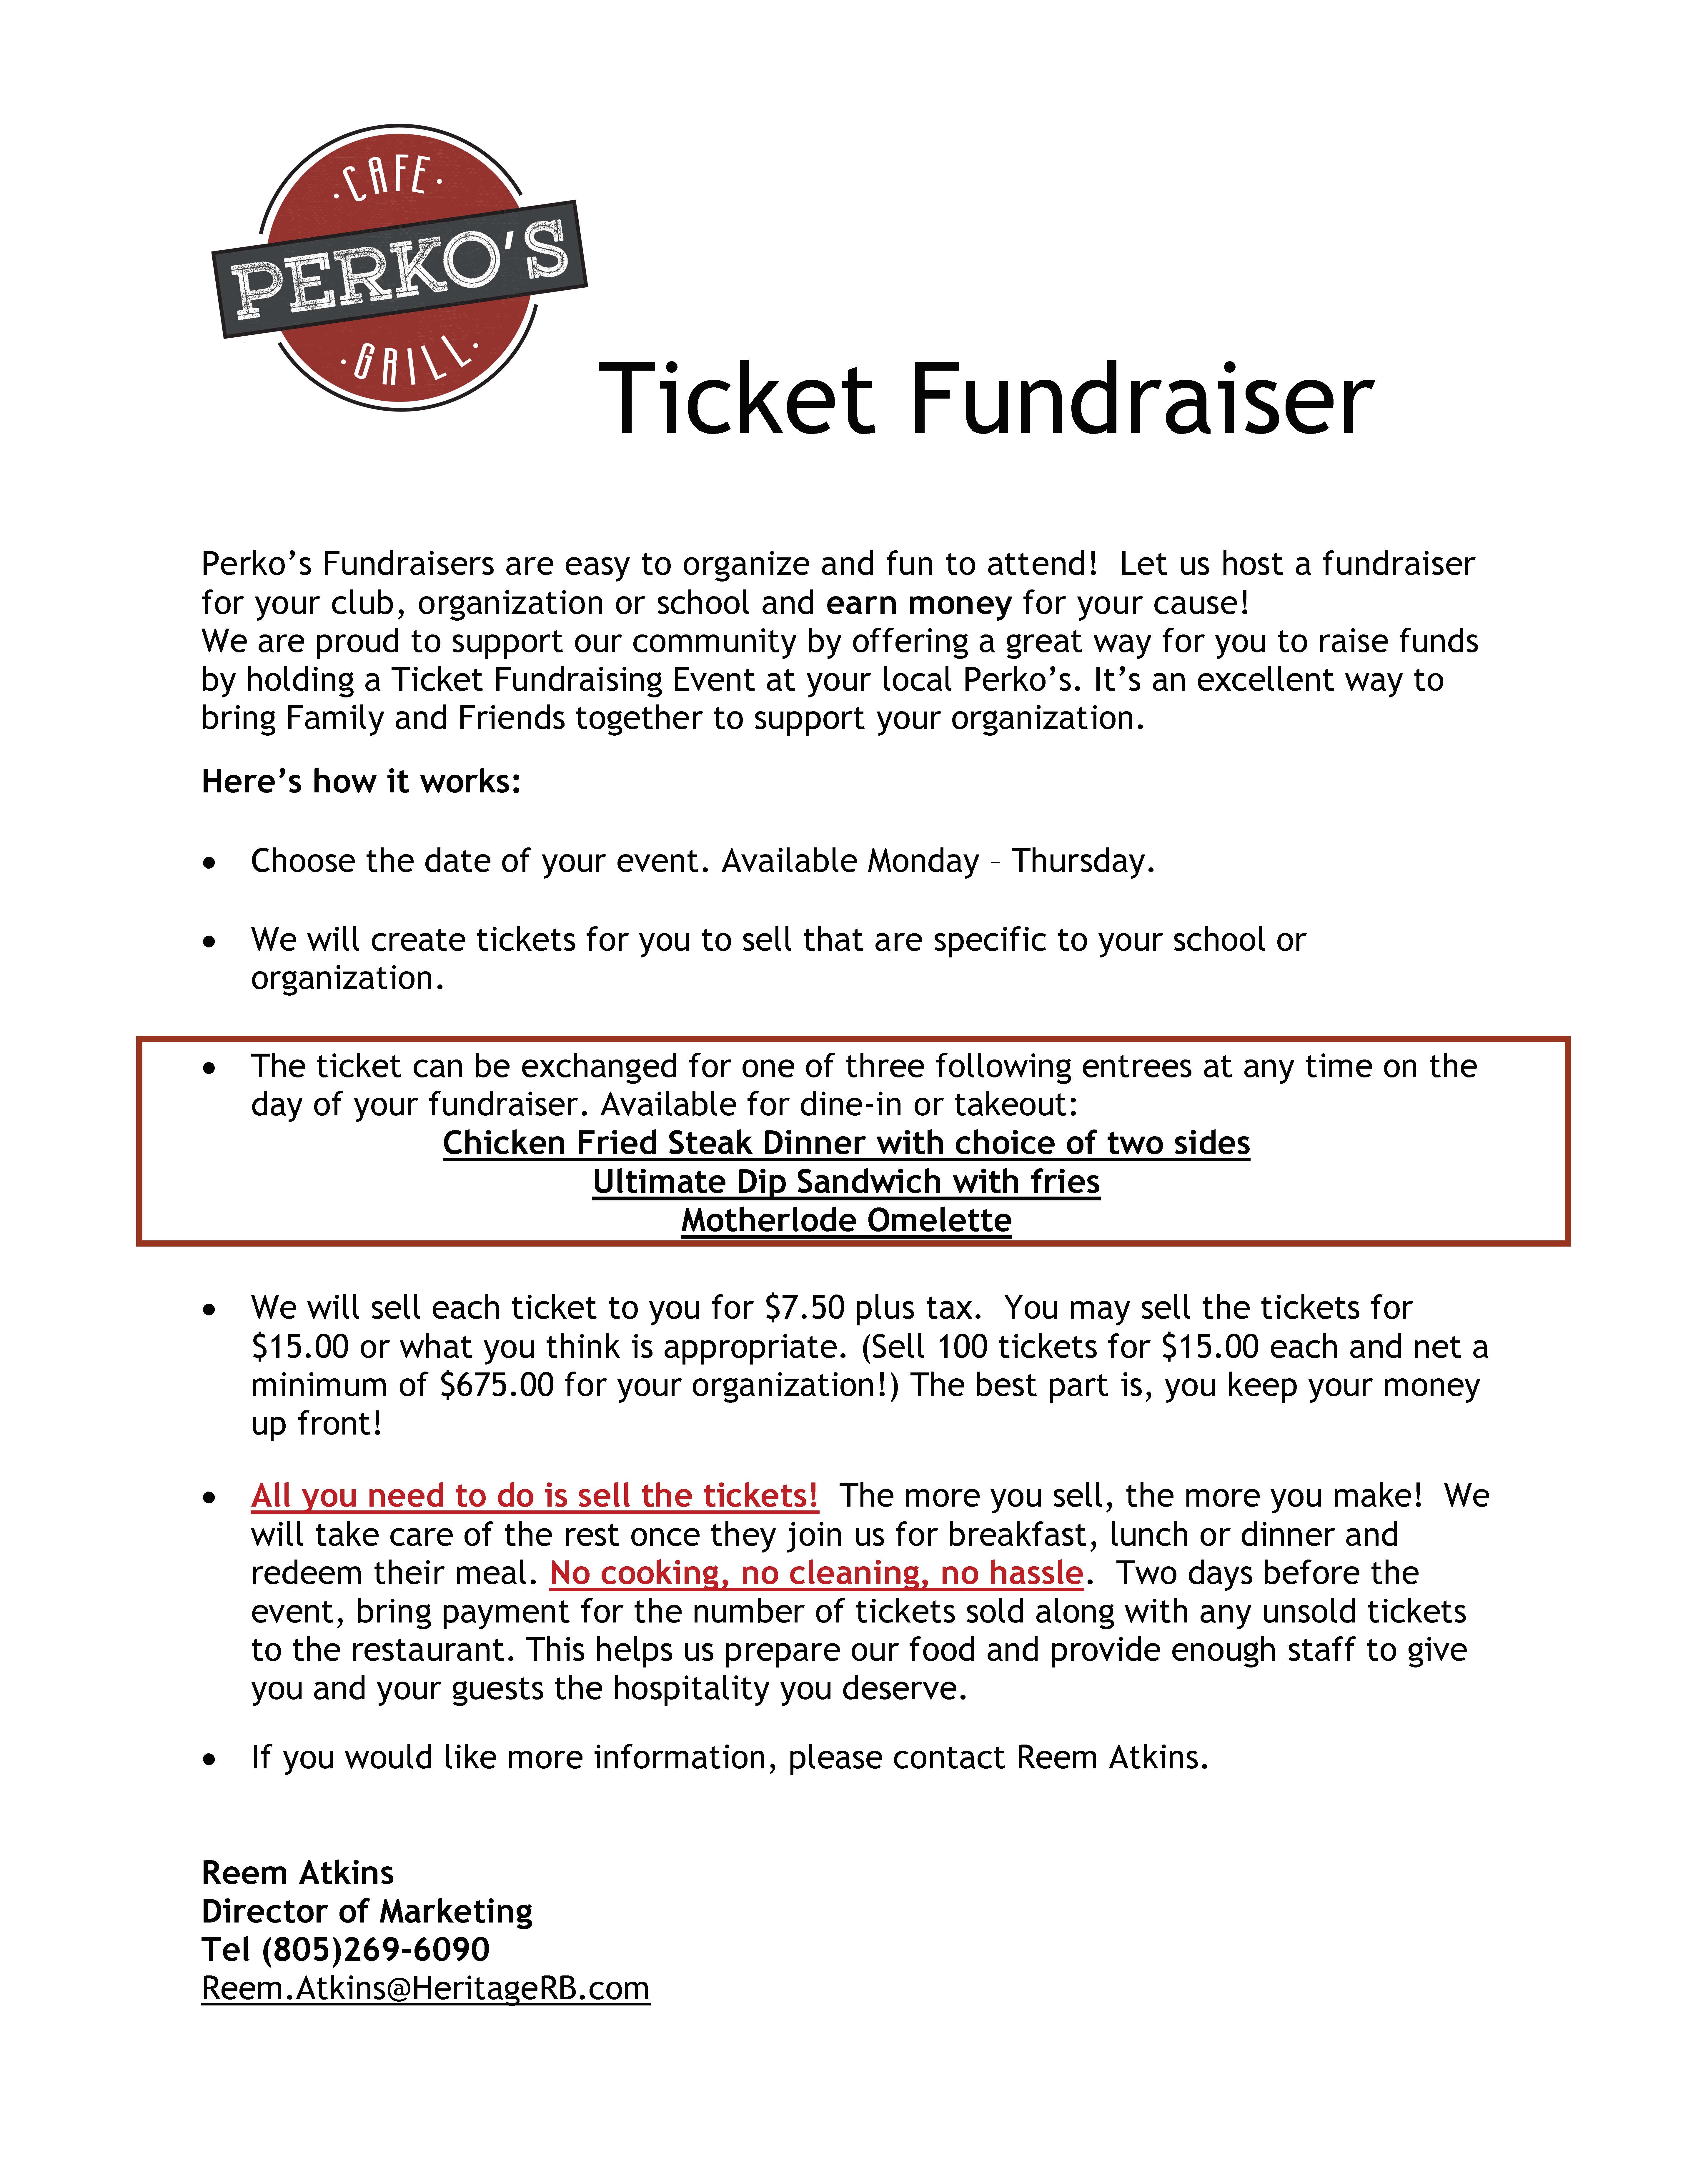 A flyer with information on Perko's ticket fundraiser